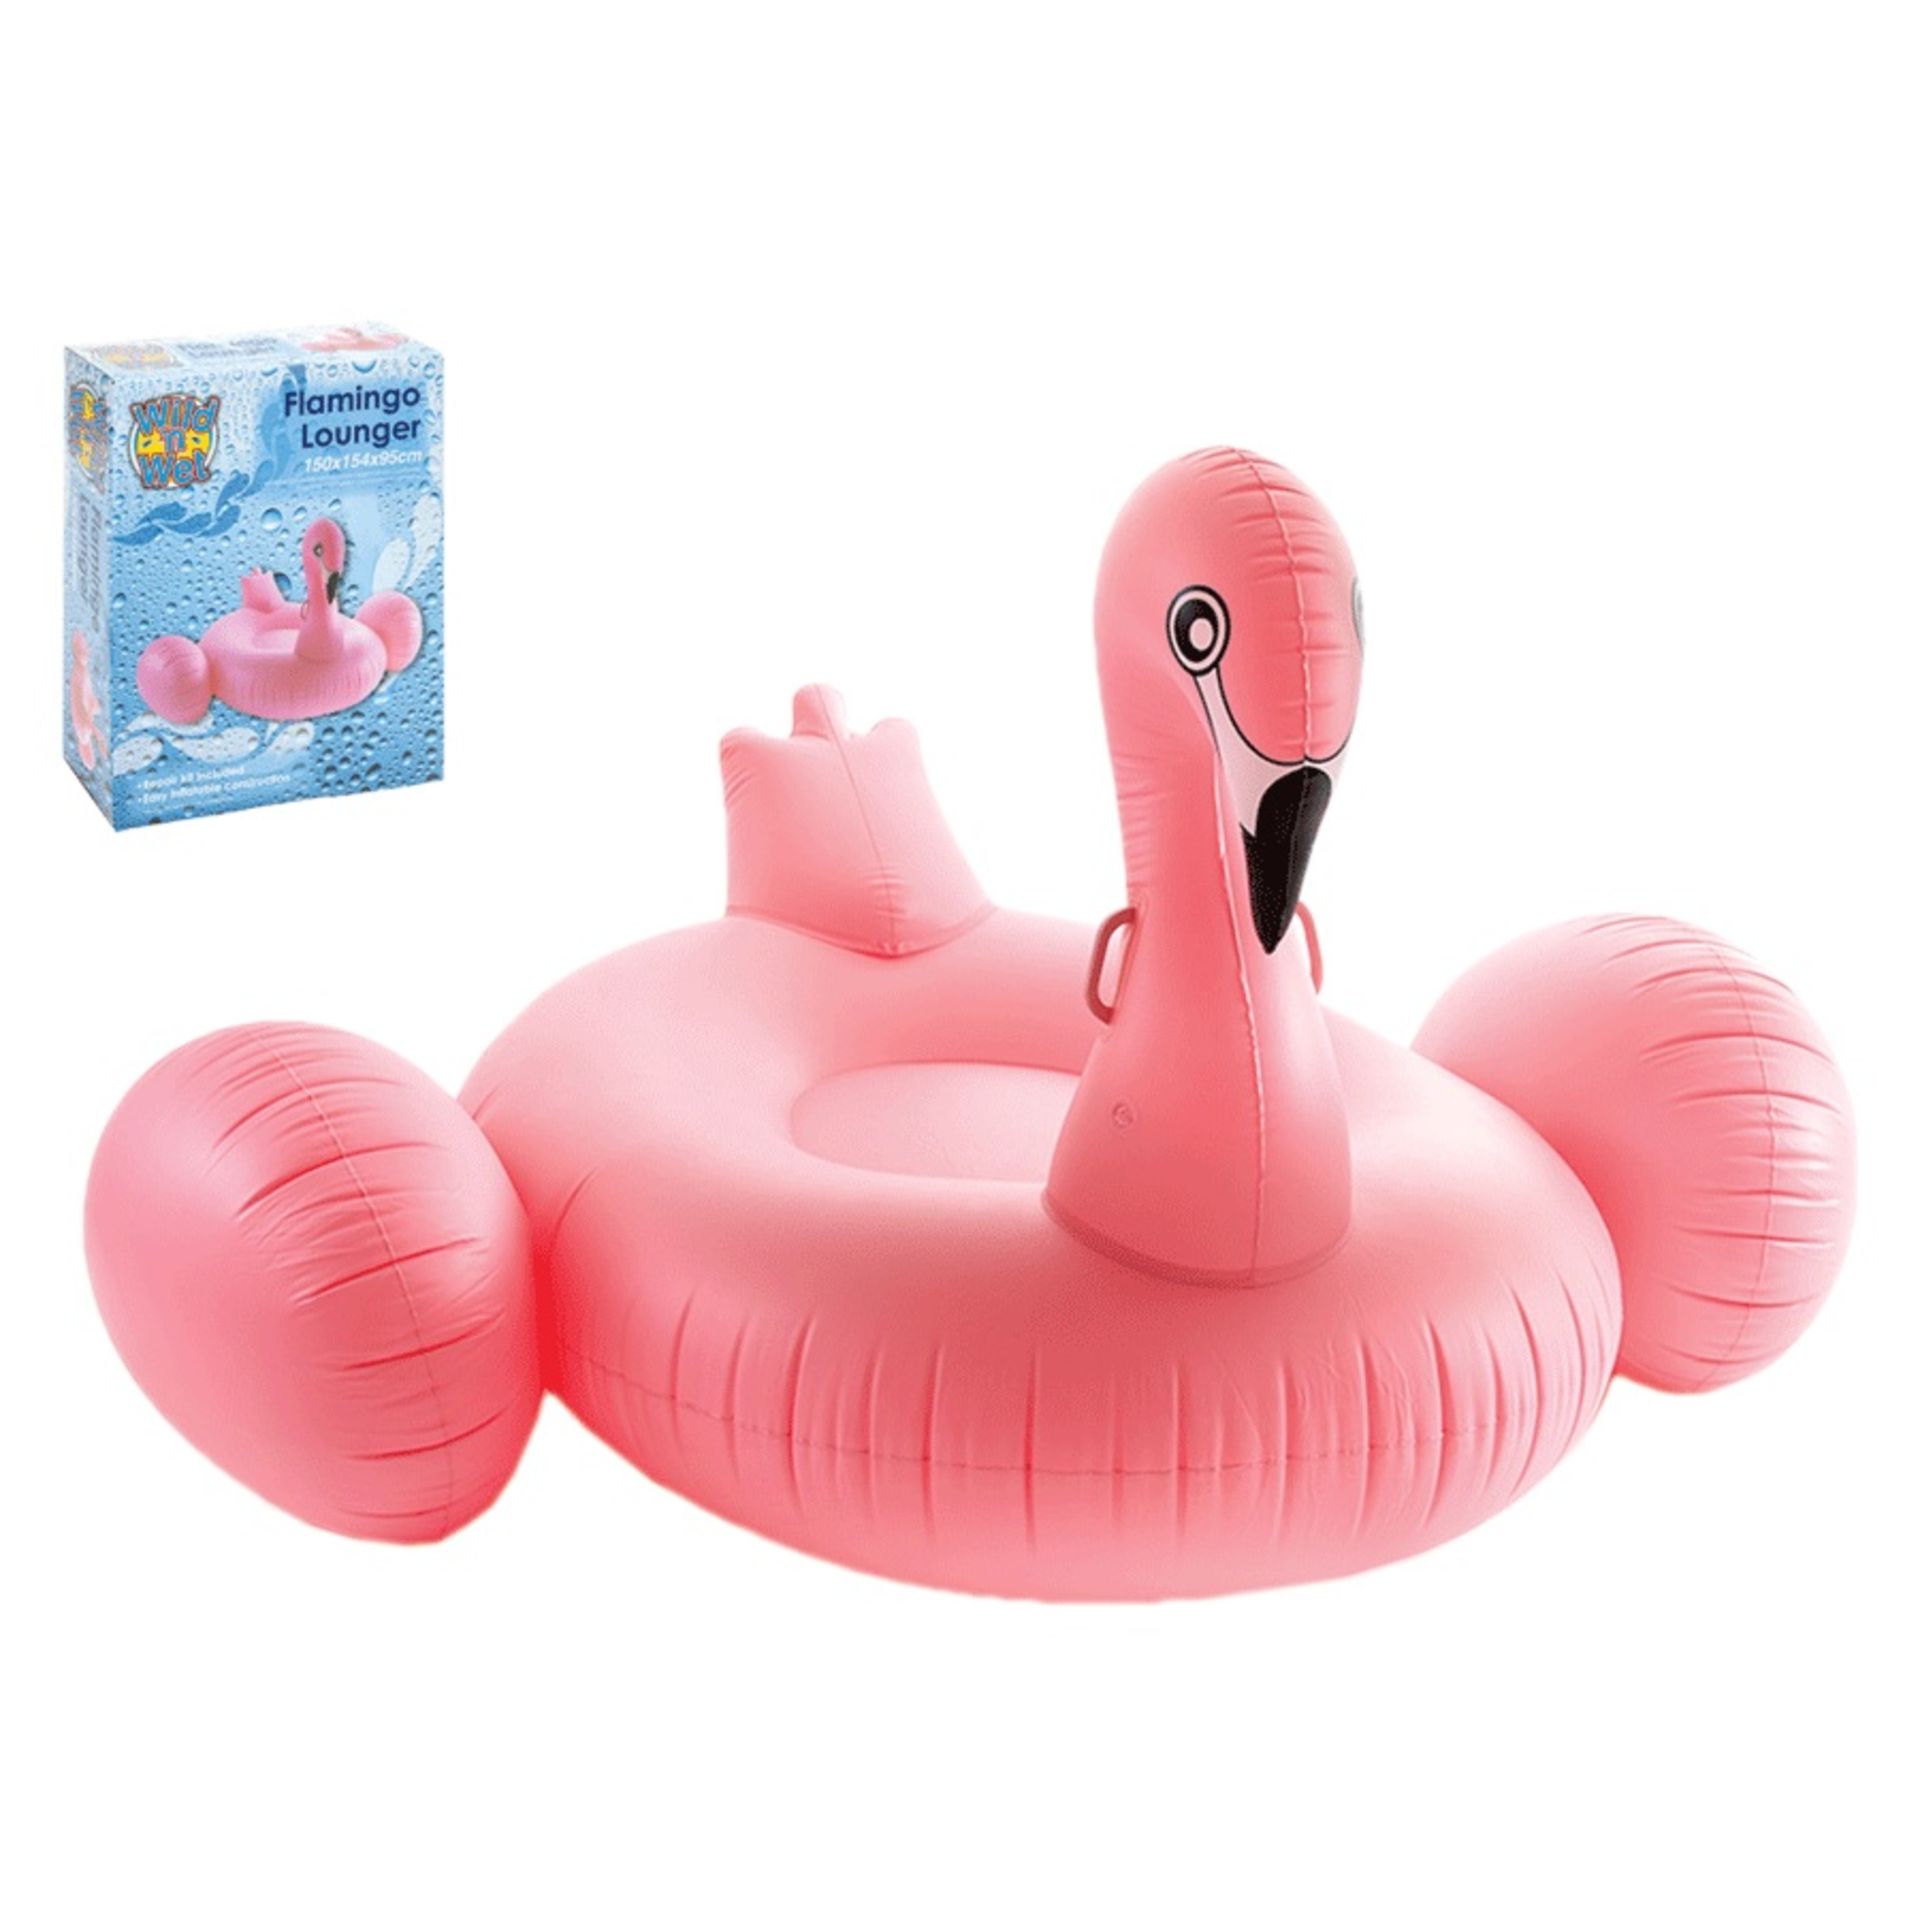 + VAT Brand New Inflatable Flamingo Lounger (150 x 154 x 95cm) - Repair Kit Included - Easy